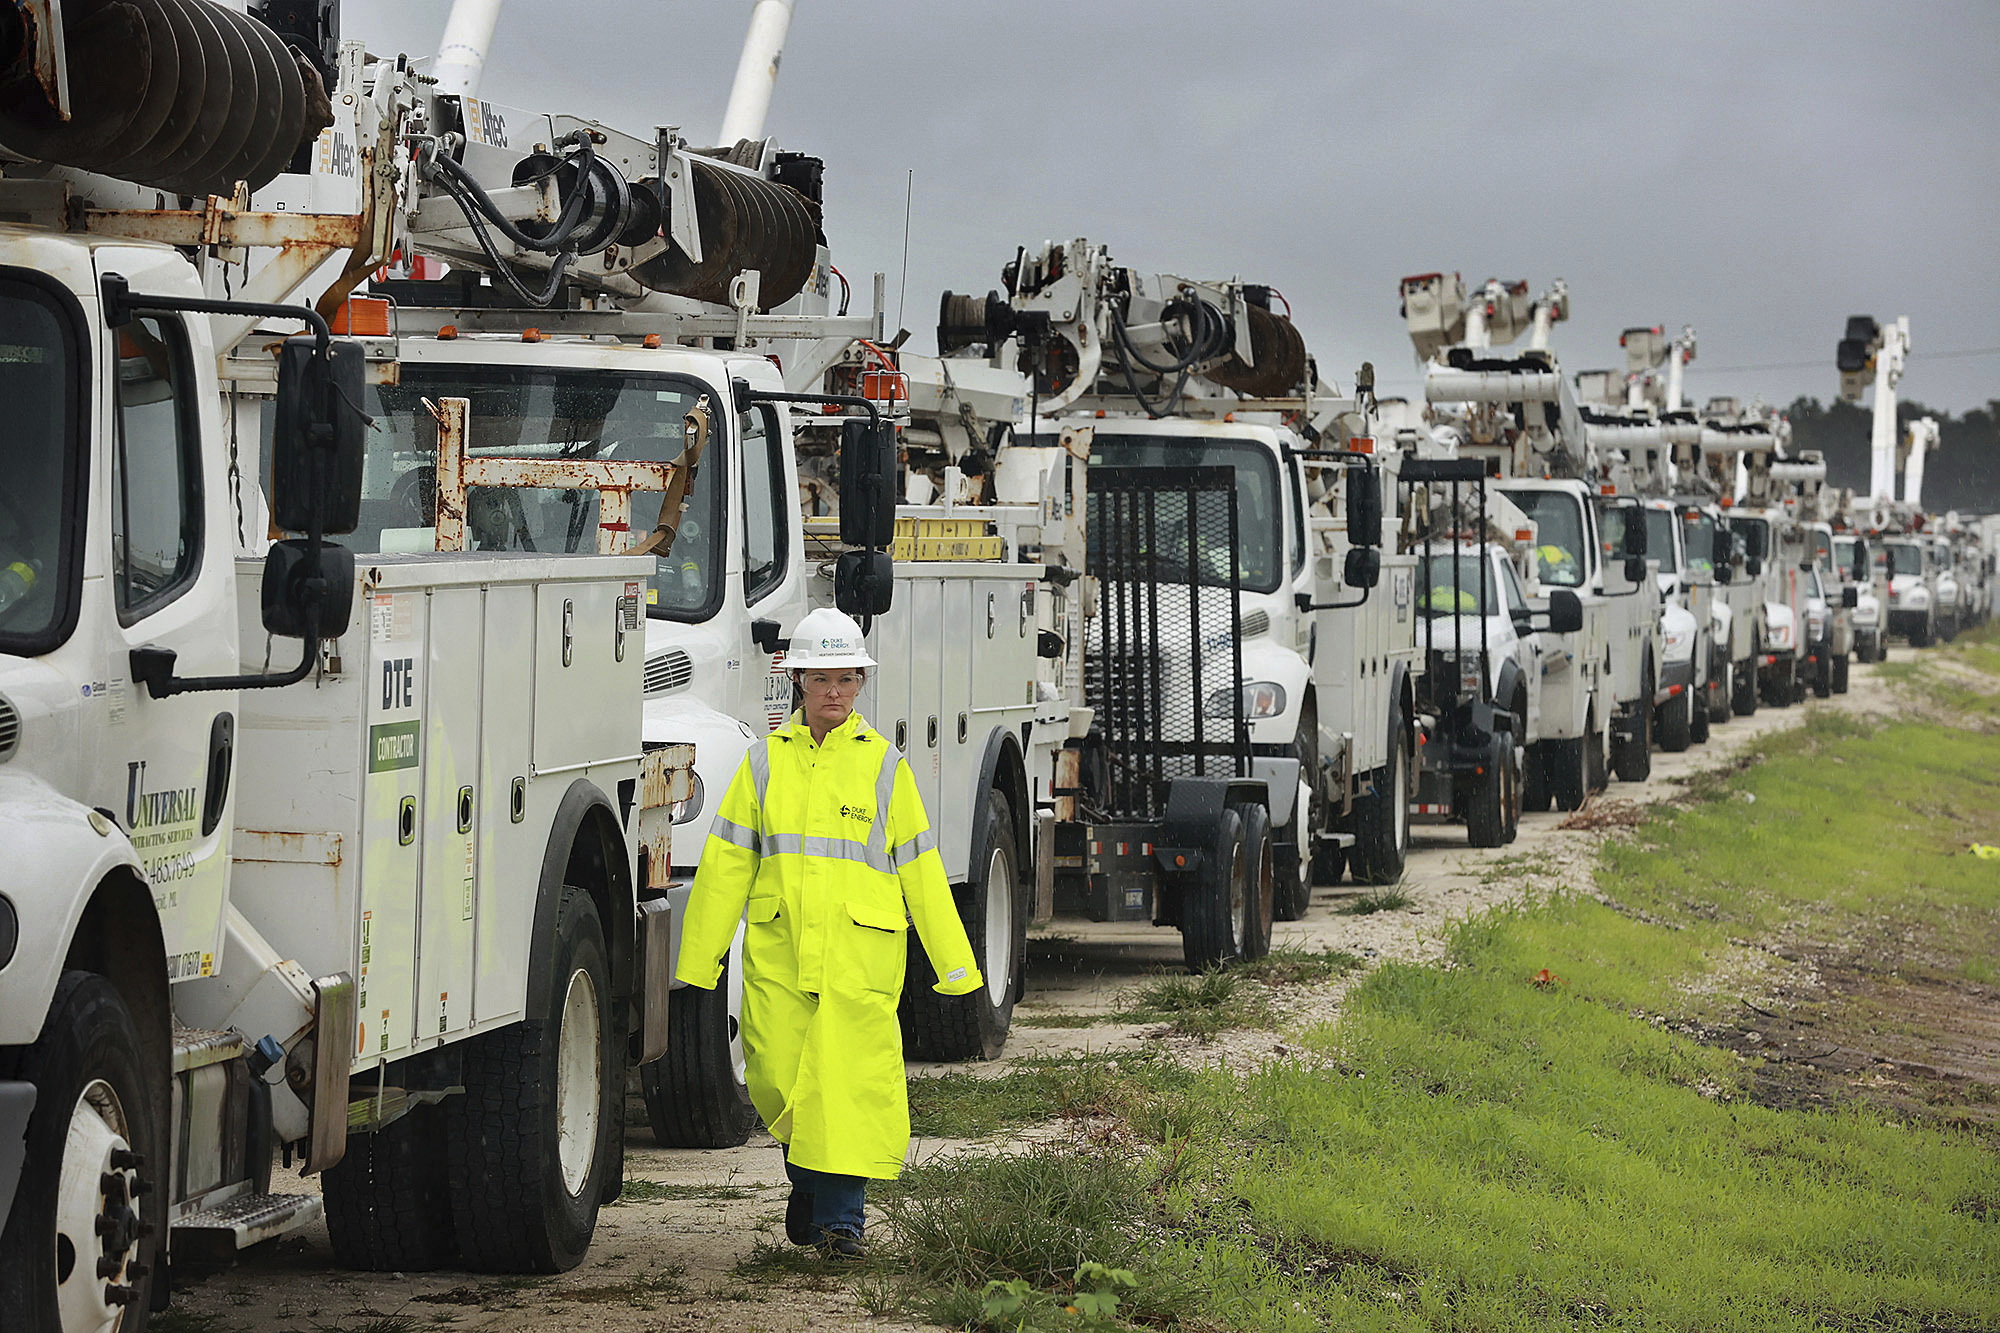 Heather Danenhower from Duke Energy walks around utility trucks in The Villages of Sumter County, Florida